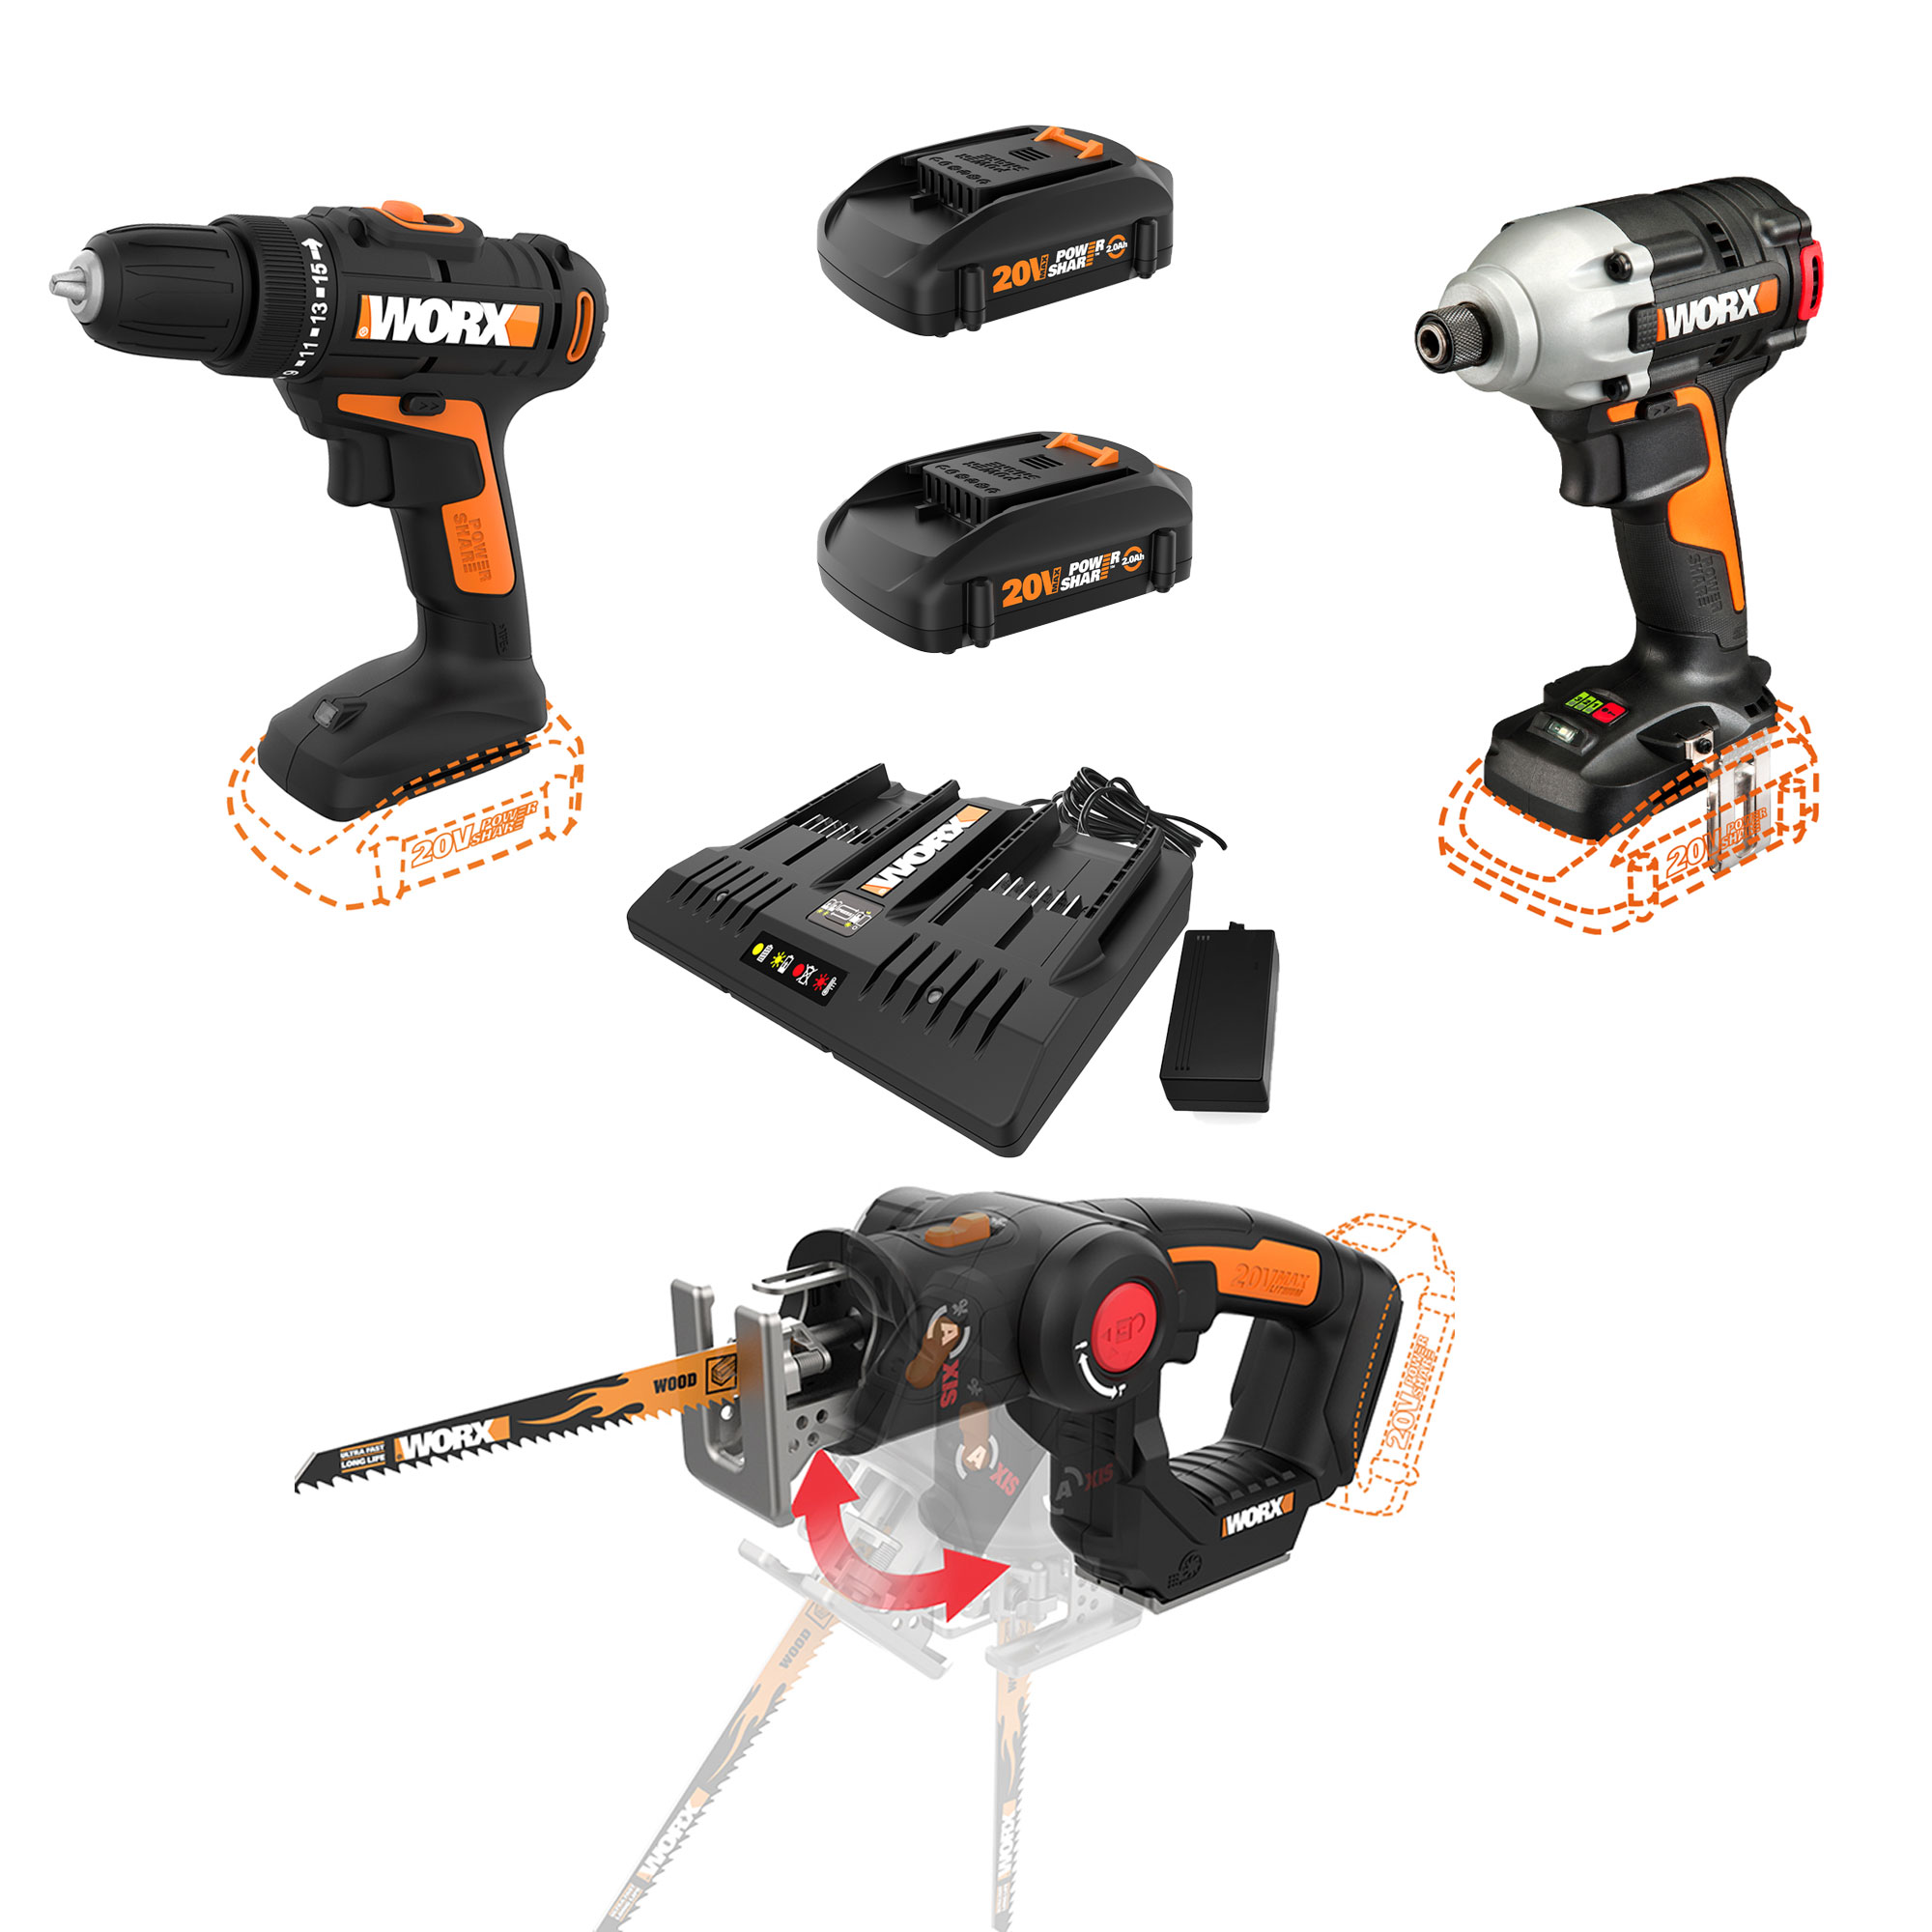 WORX WX911L 20 Volt Combo Kit with Power Drill, Impact Driver, AXIS Saw, and Batteries - image 1 of 10